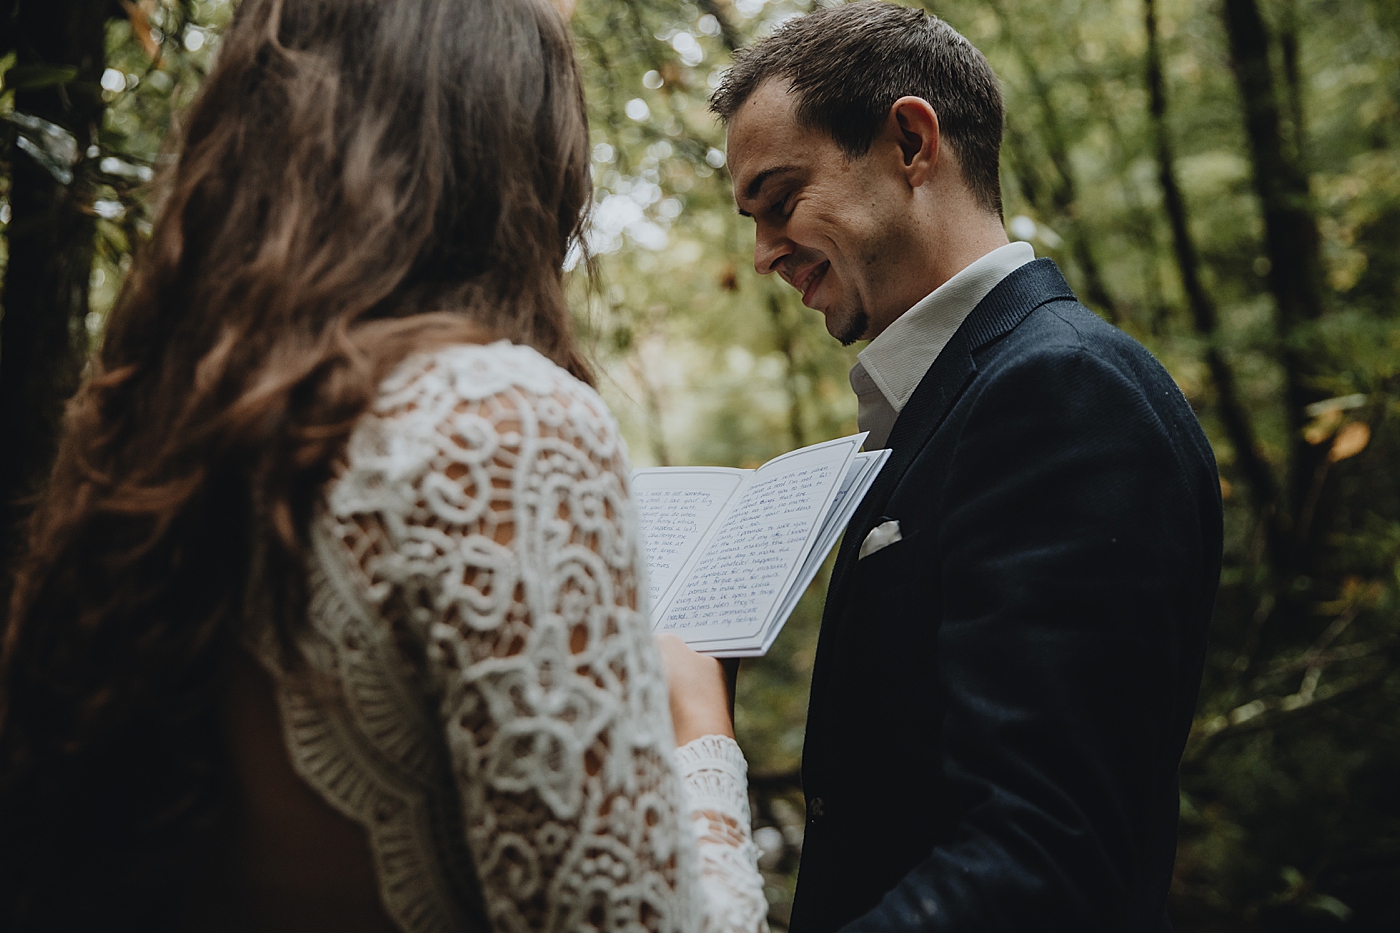 Groom smiling as Bride gives vows Catawba Falls Asheville, NC Elopement Photography captured by Maggie Alvarez Photography